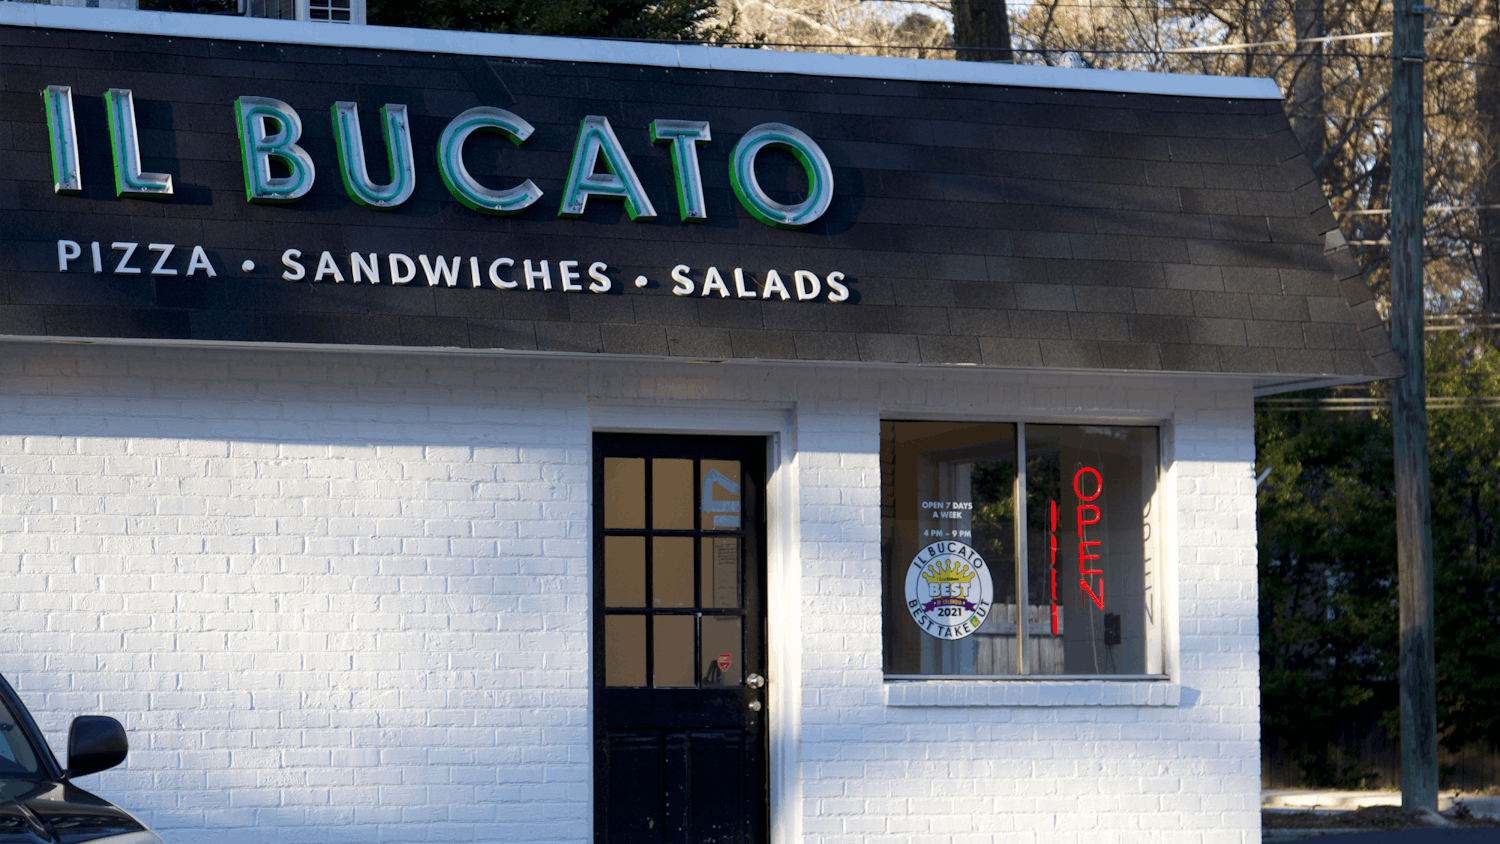 Il Bucato is a take-out-only restaurant that offers a variety of food including pizzas, sandwiches and salads. It's located at 1615 N Beltline Blvd in Columbia, SC.